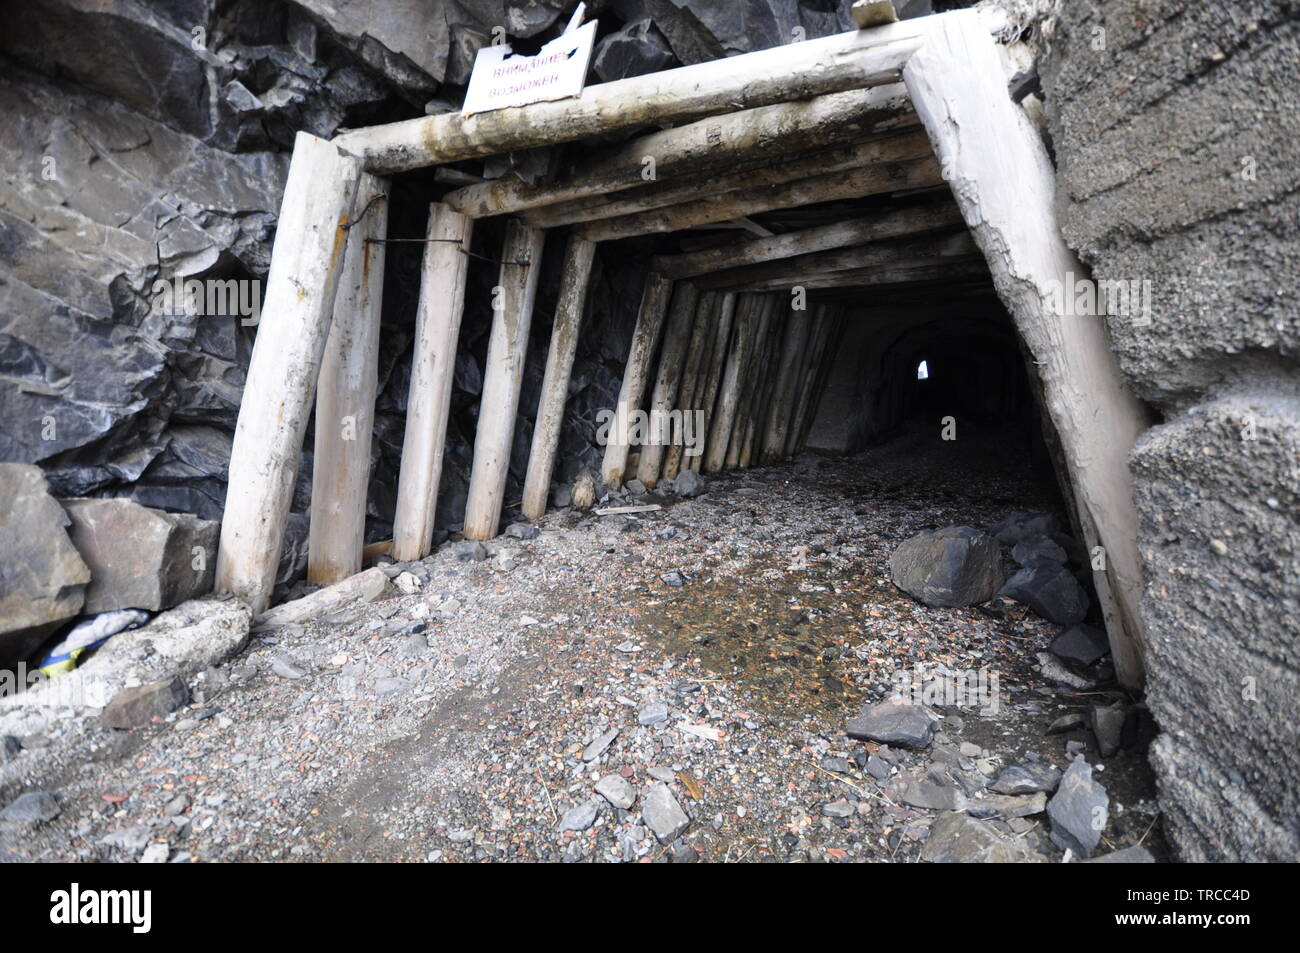 Southern end of the tunnel at Cape Jonquiere, Aleksandrovsk-Sakhalinskiy, Sakhalin Island, Остров  Сахалин Russia Stock Photo